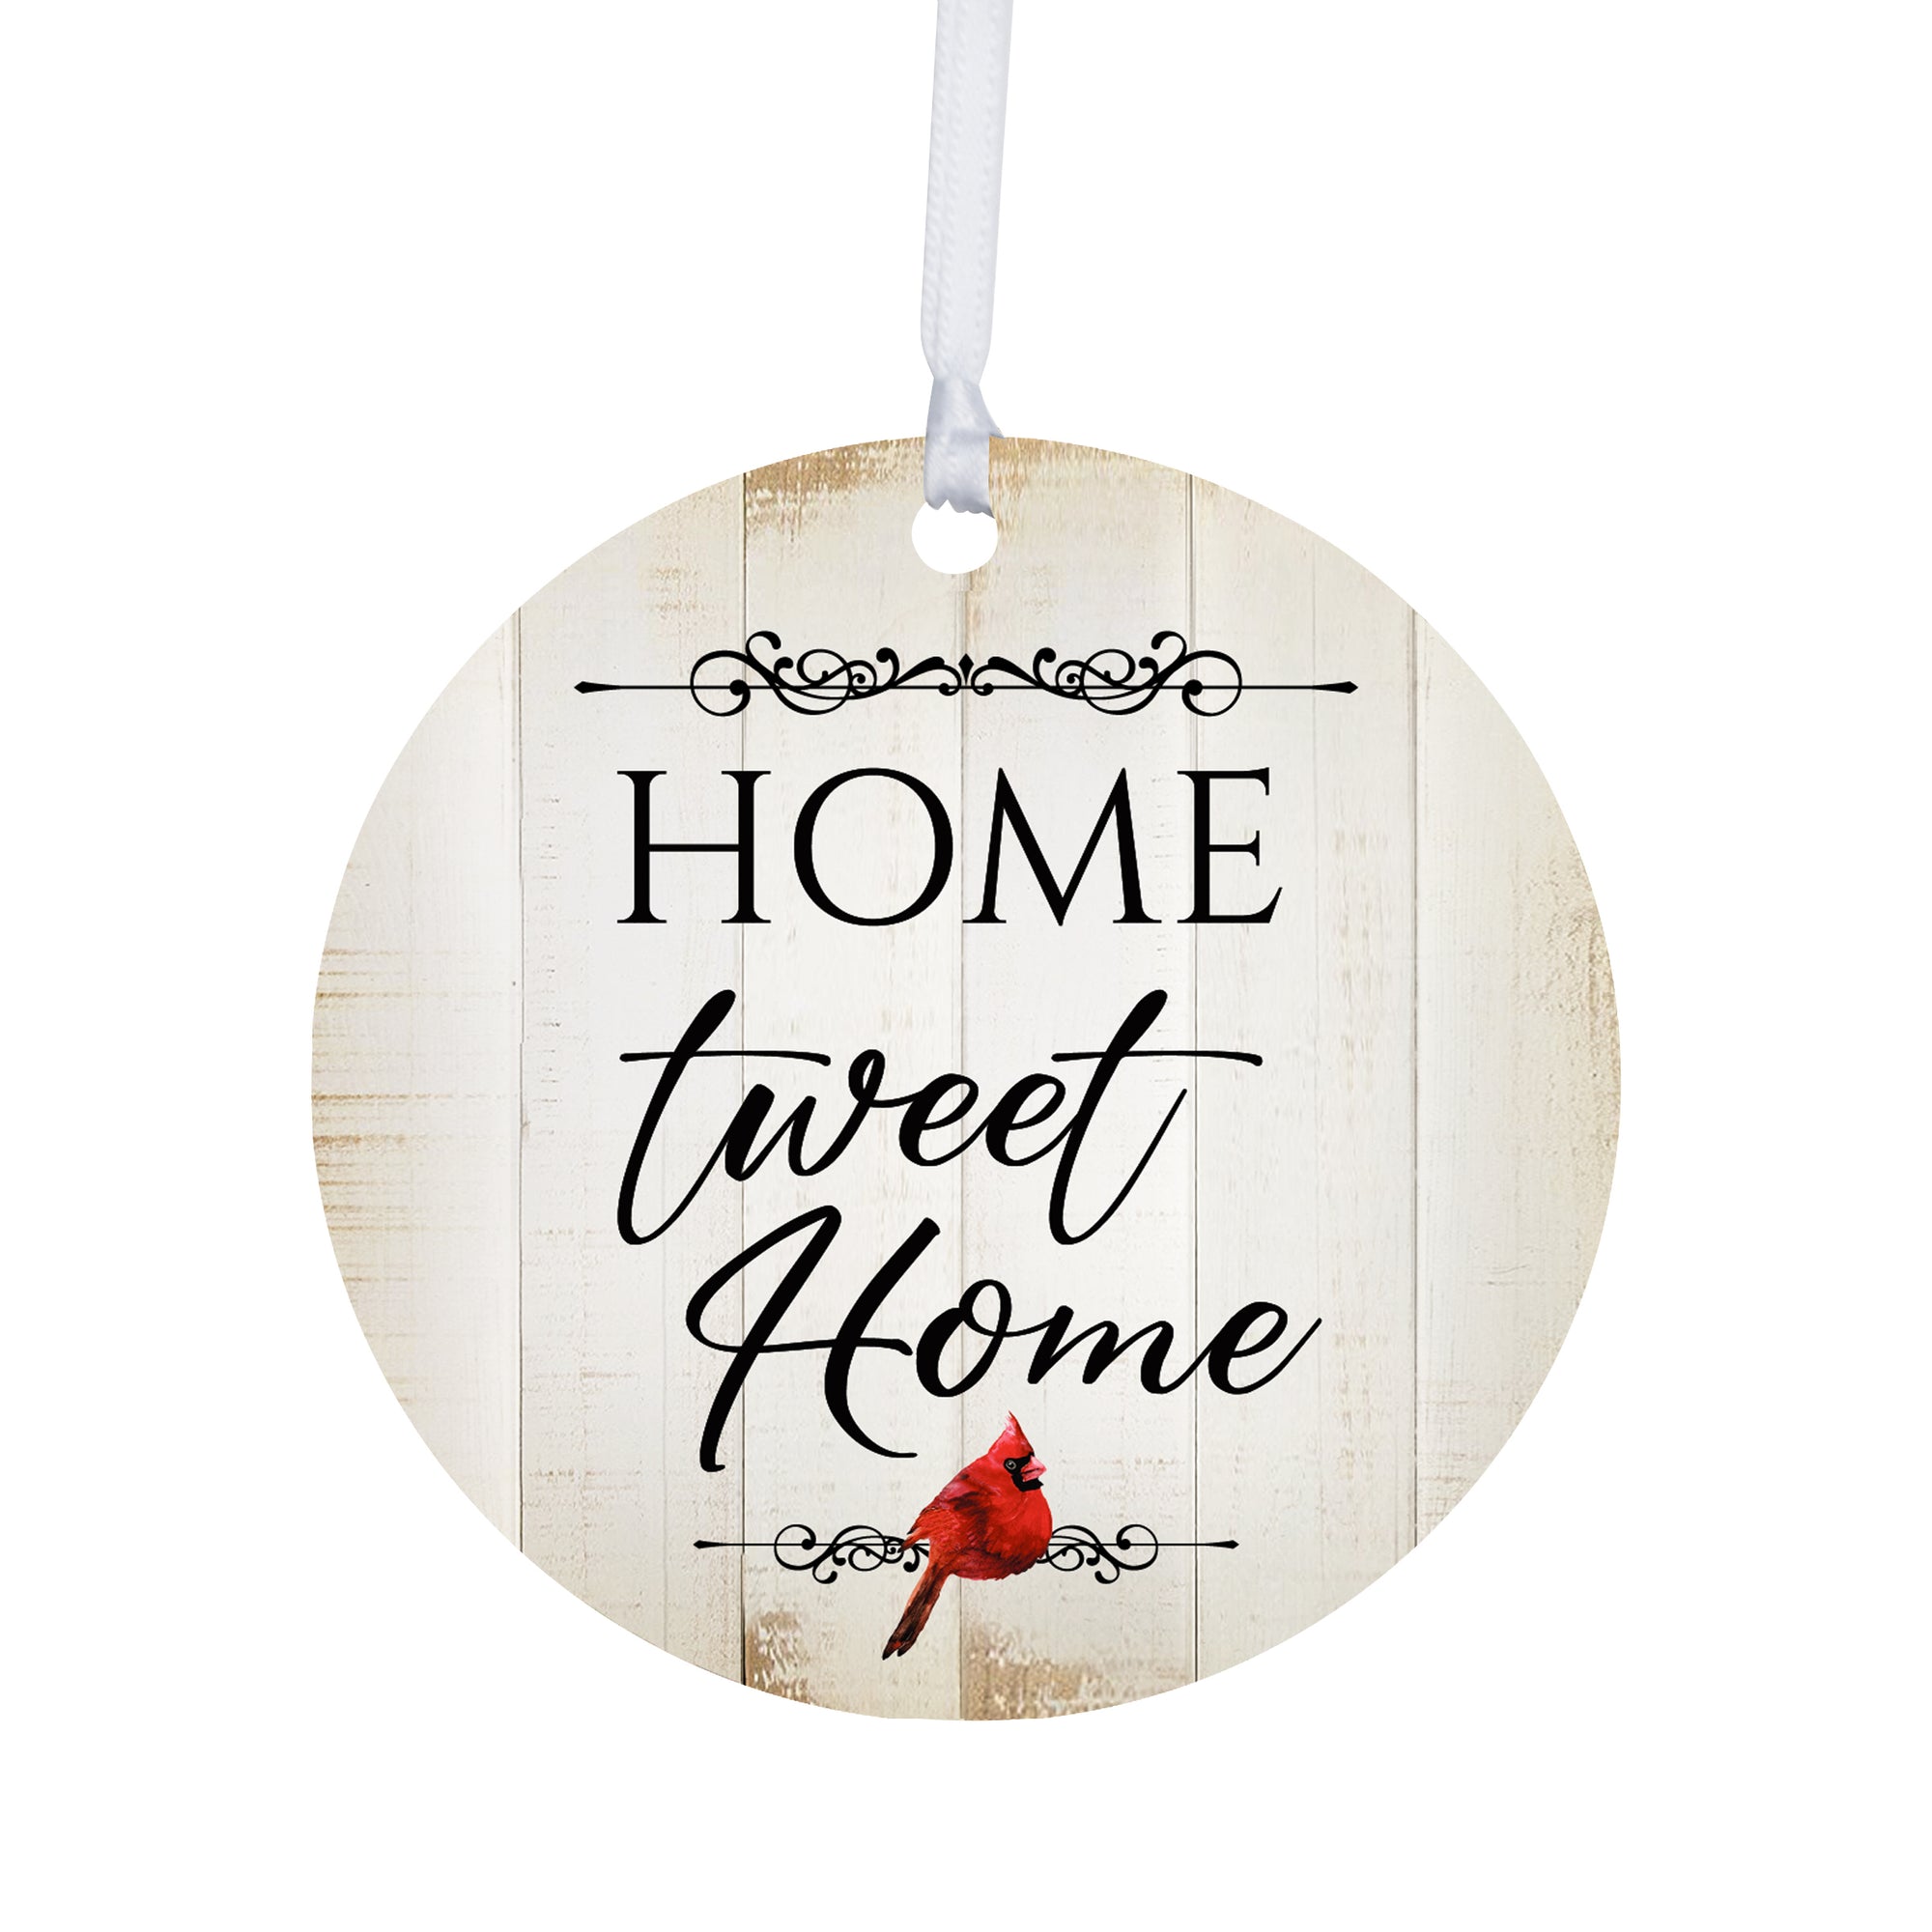 Vintage-Inspired Cardinal Ornament With Everyday Verses Gift Ideas - Home Tweet Home